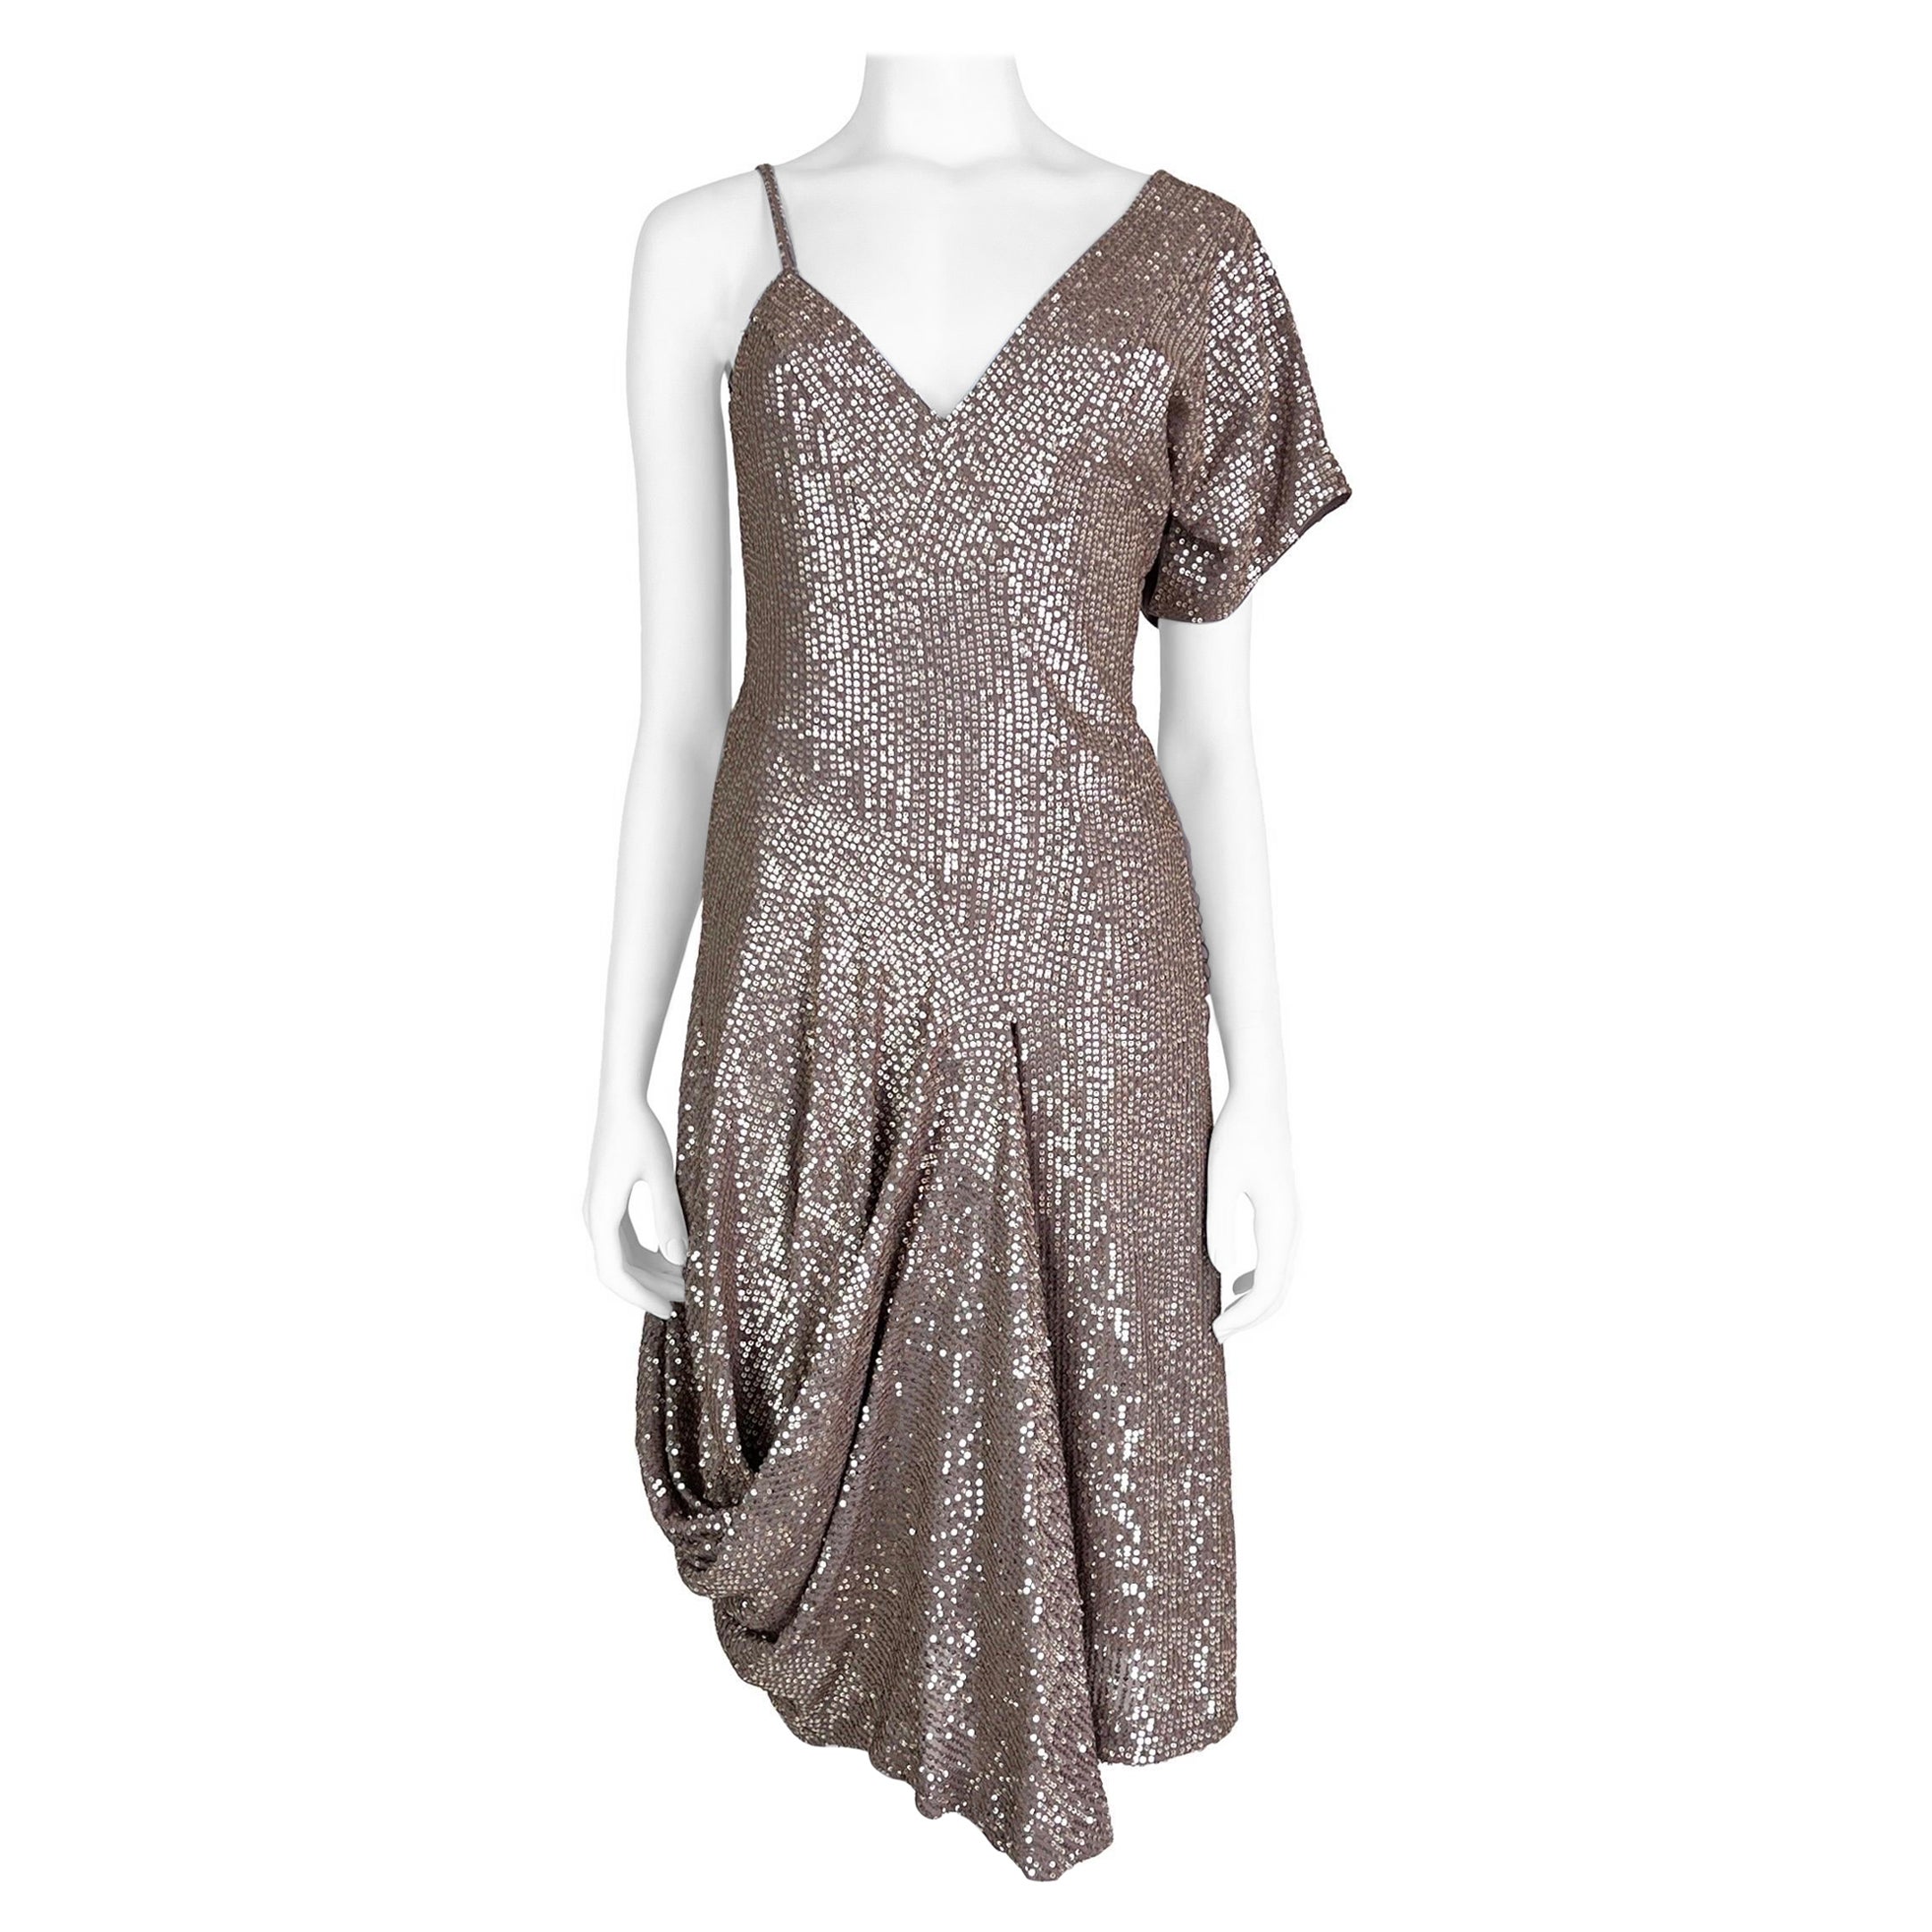 Dior by John Galliano Resort 2007 Sequin Dress For Sale